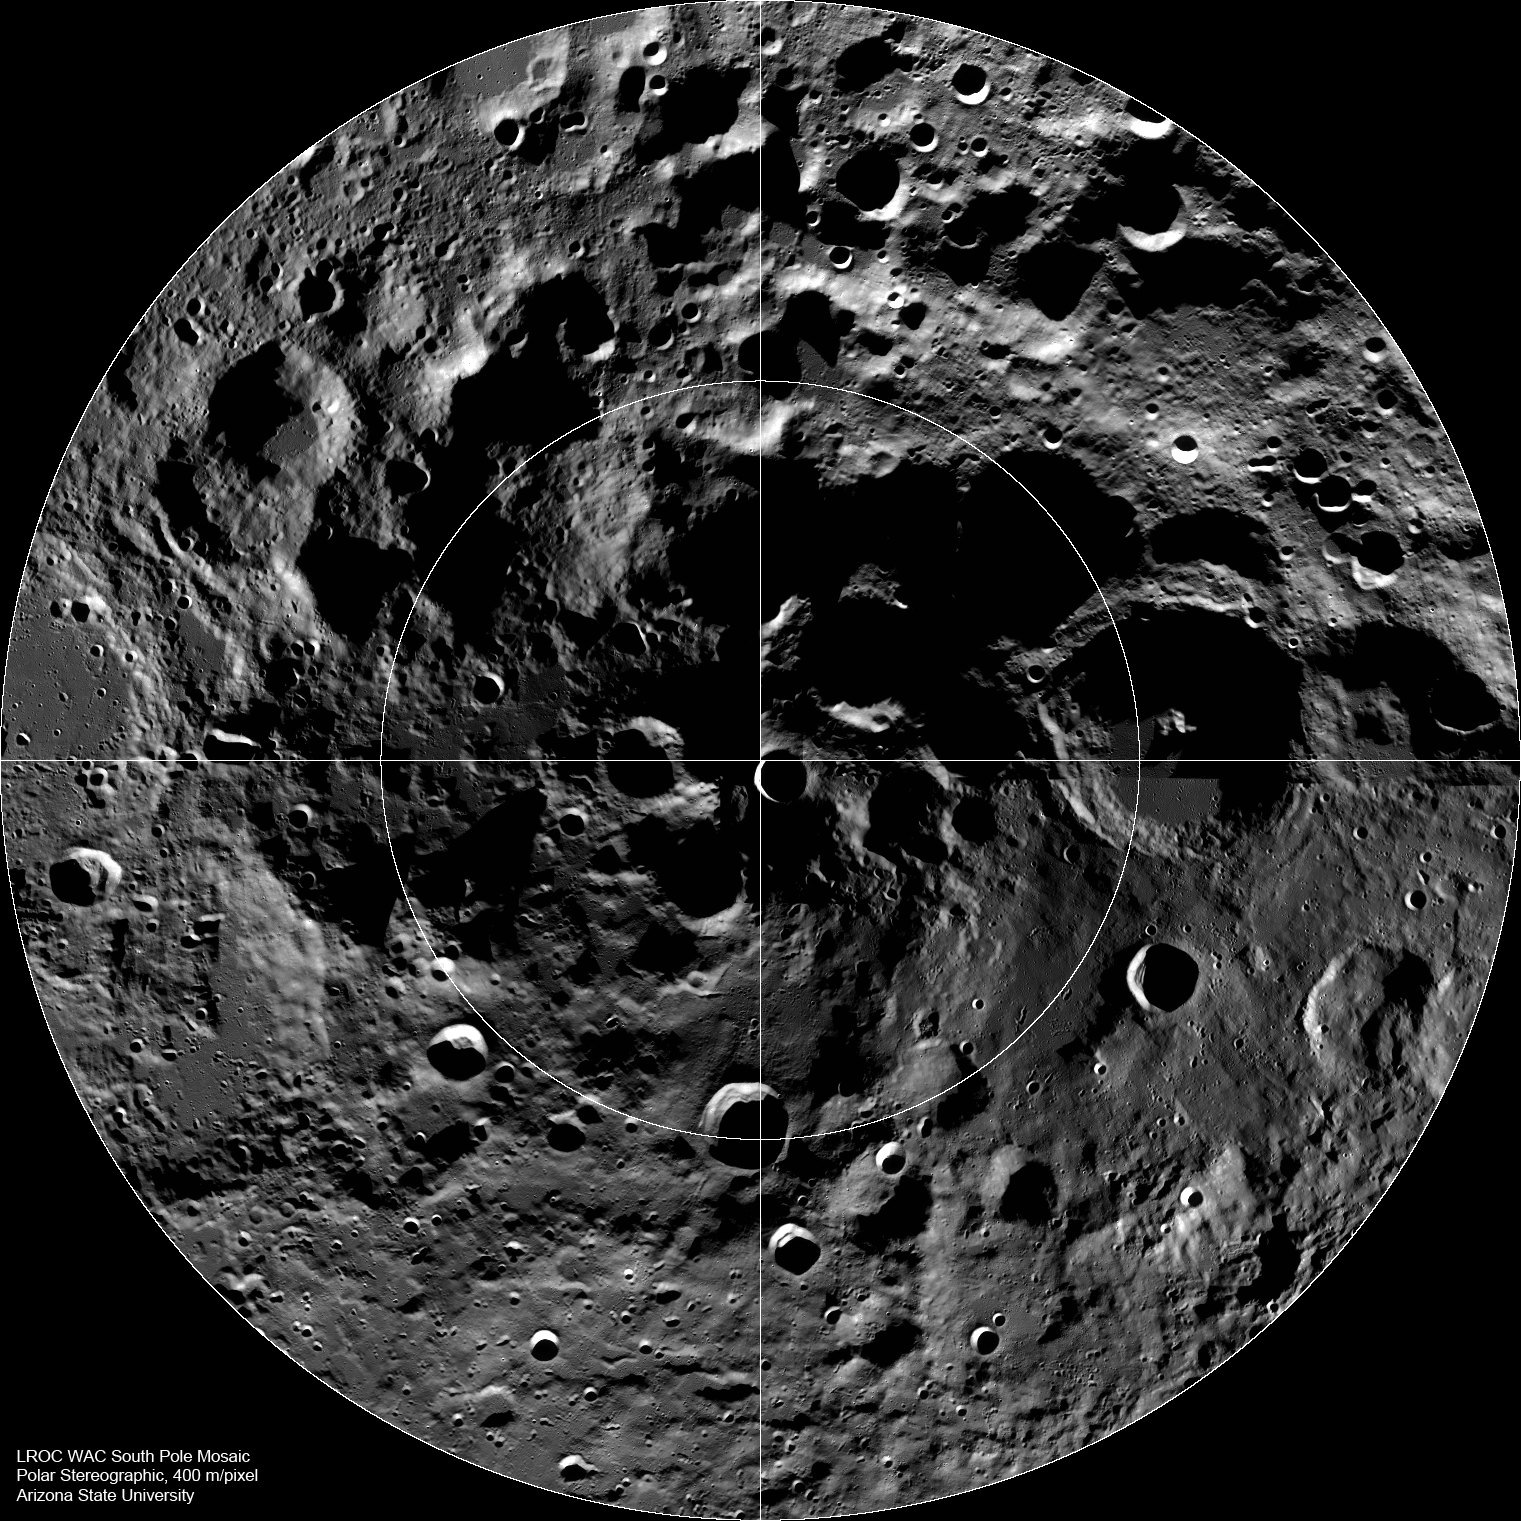 The lunar south pole is one of the most compelling places in the entire solar system.  This mosaic is from the Wide Area Camera on NASA's Lunar Reconnaissance Orbiter.